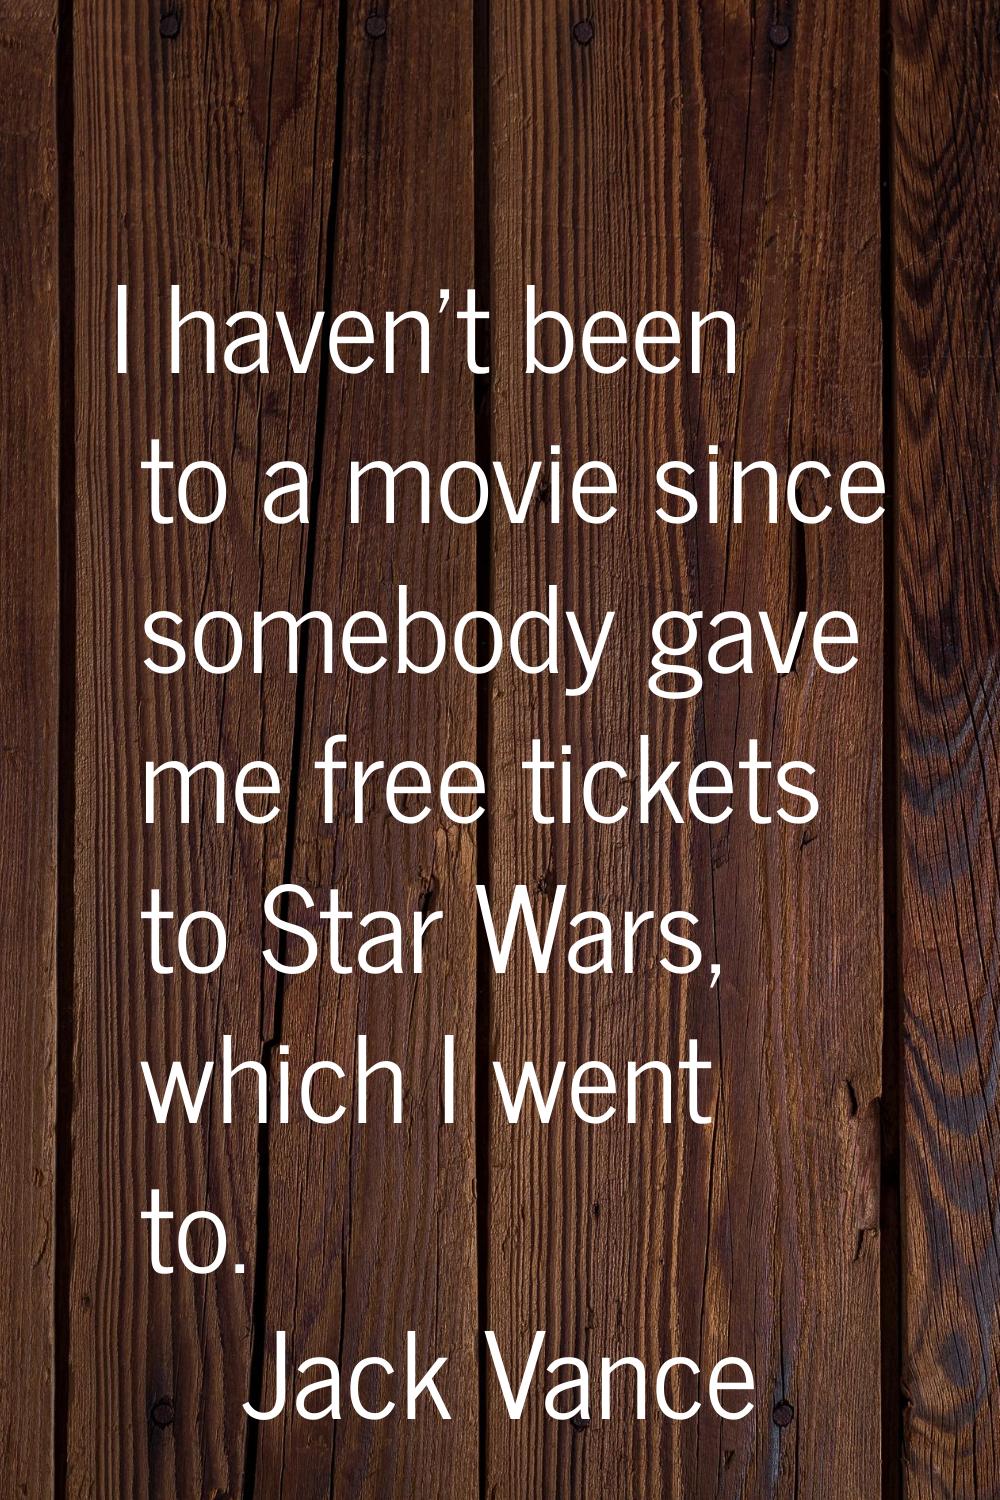 I haven't been to a movie since somebody gave me free tickets to Star Wars, which I went to.